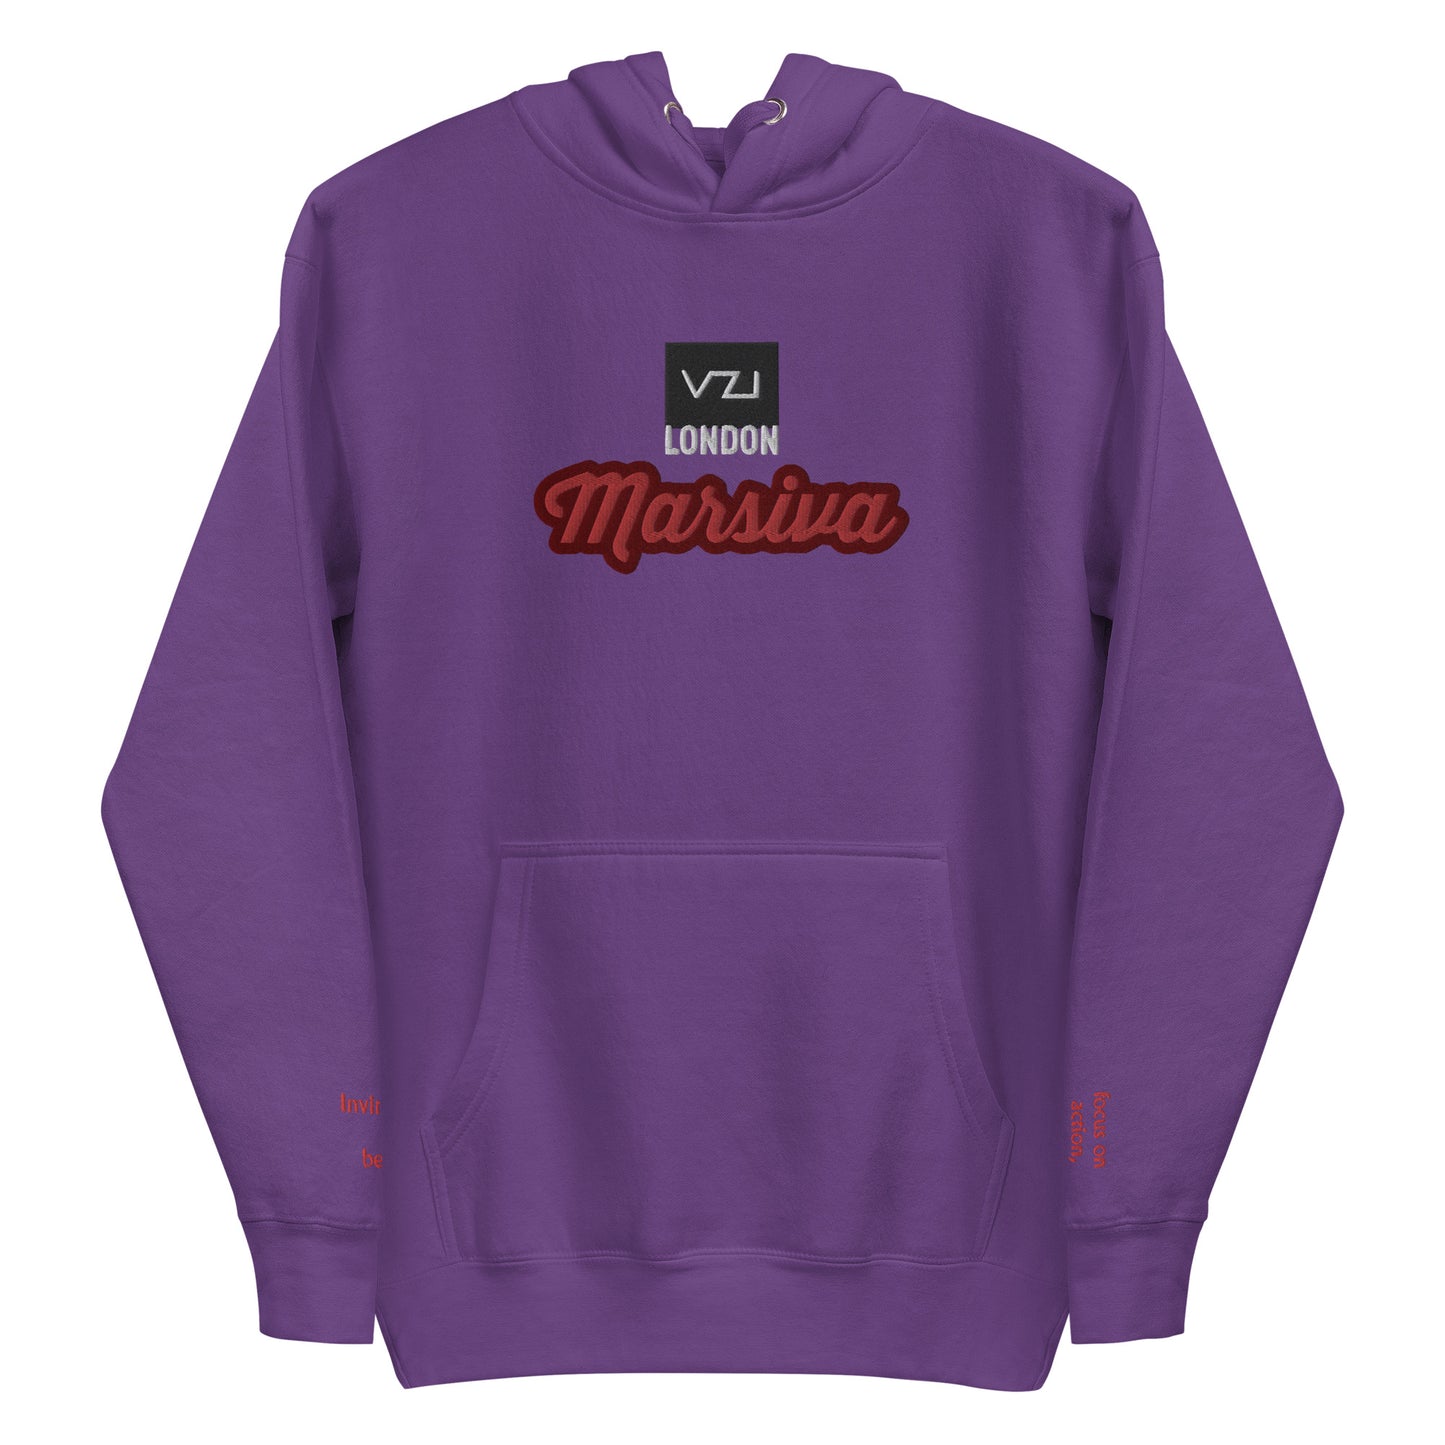 PURPLE HOODIE VZI Marsiva Unisex Hoodie - Classic Cotton for Action, Strength, and Power